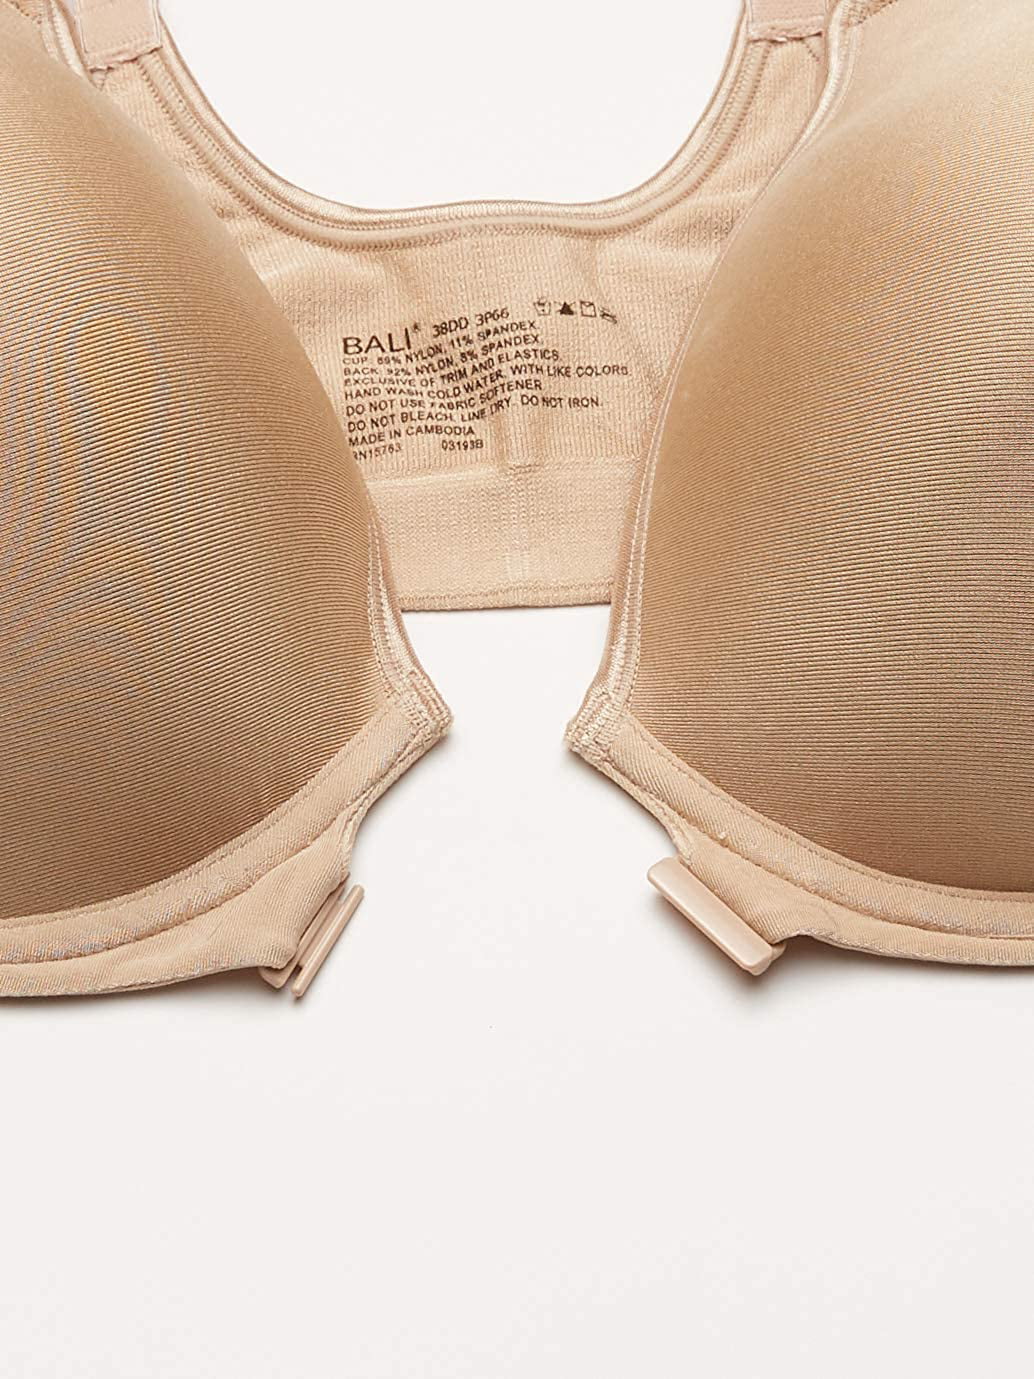 Bali Comfort Revolution Front Close Shaping Underwire Bra Nude 34D